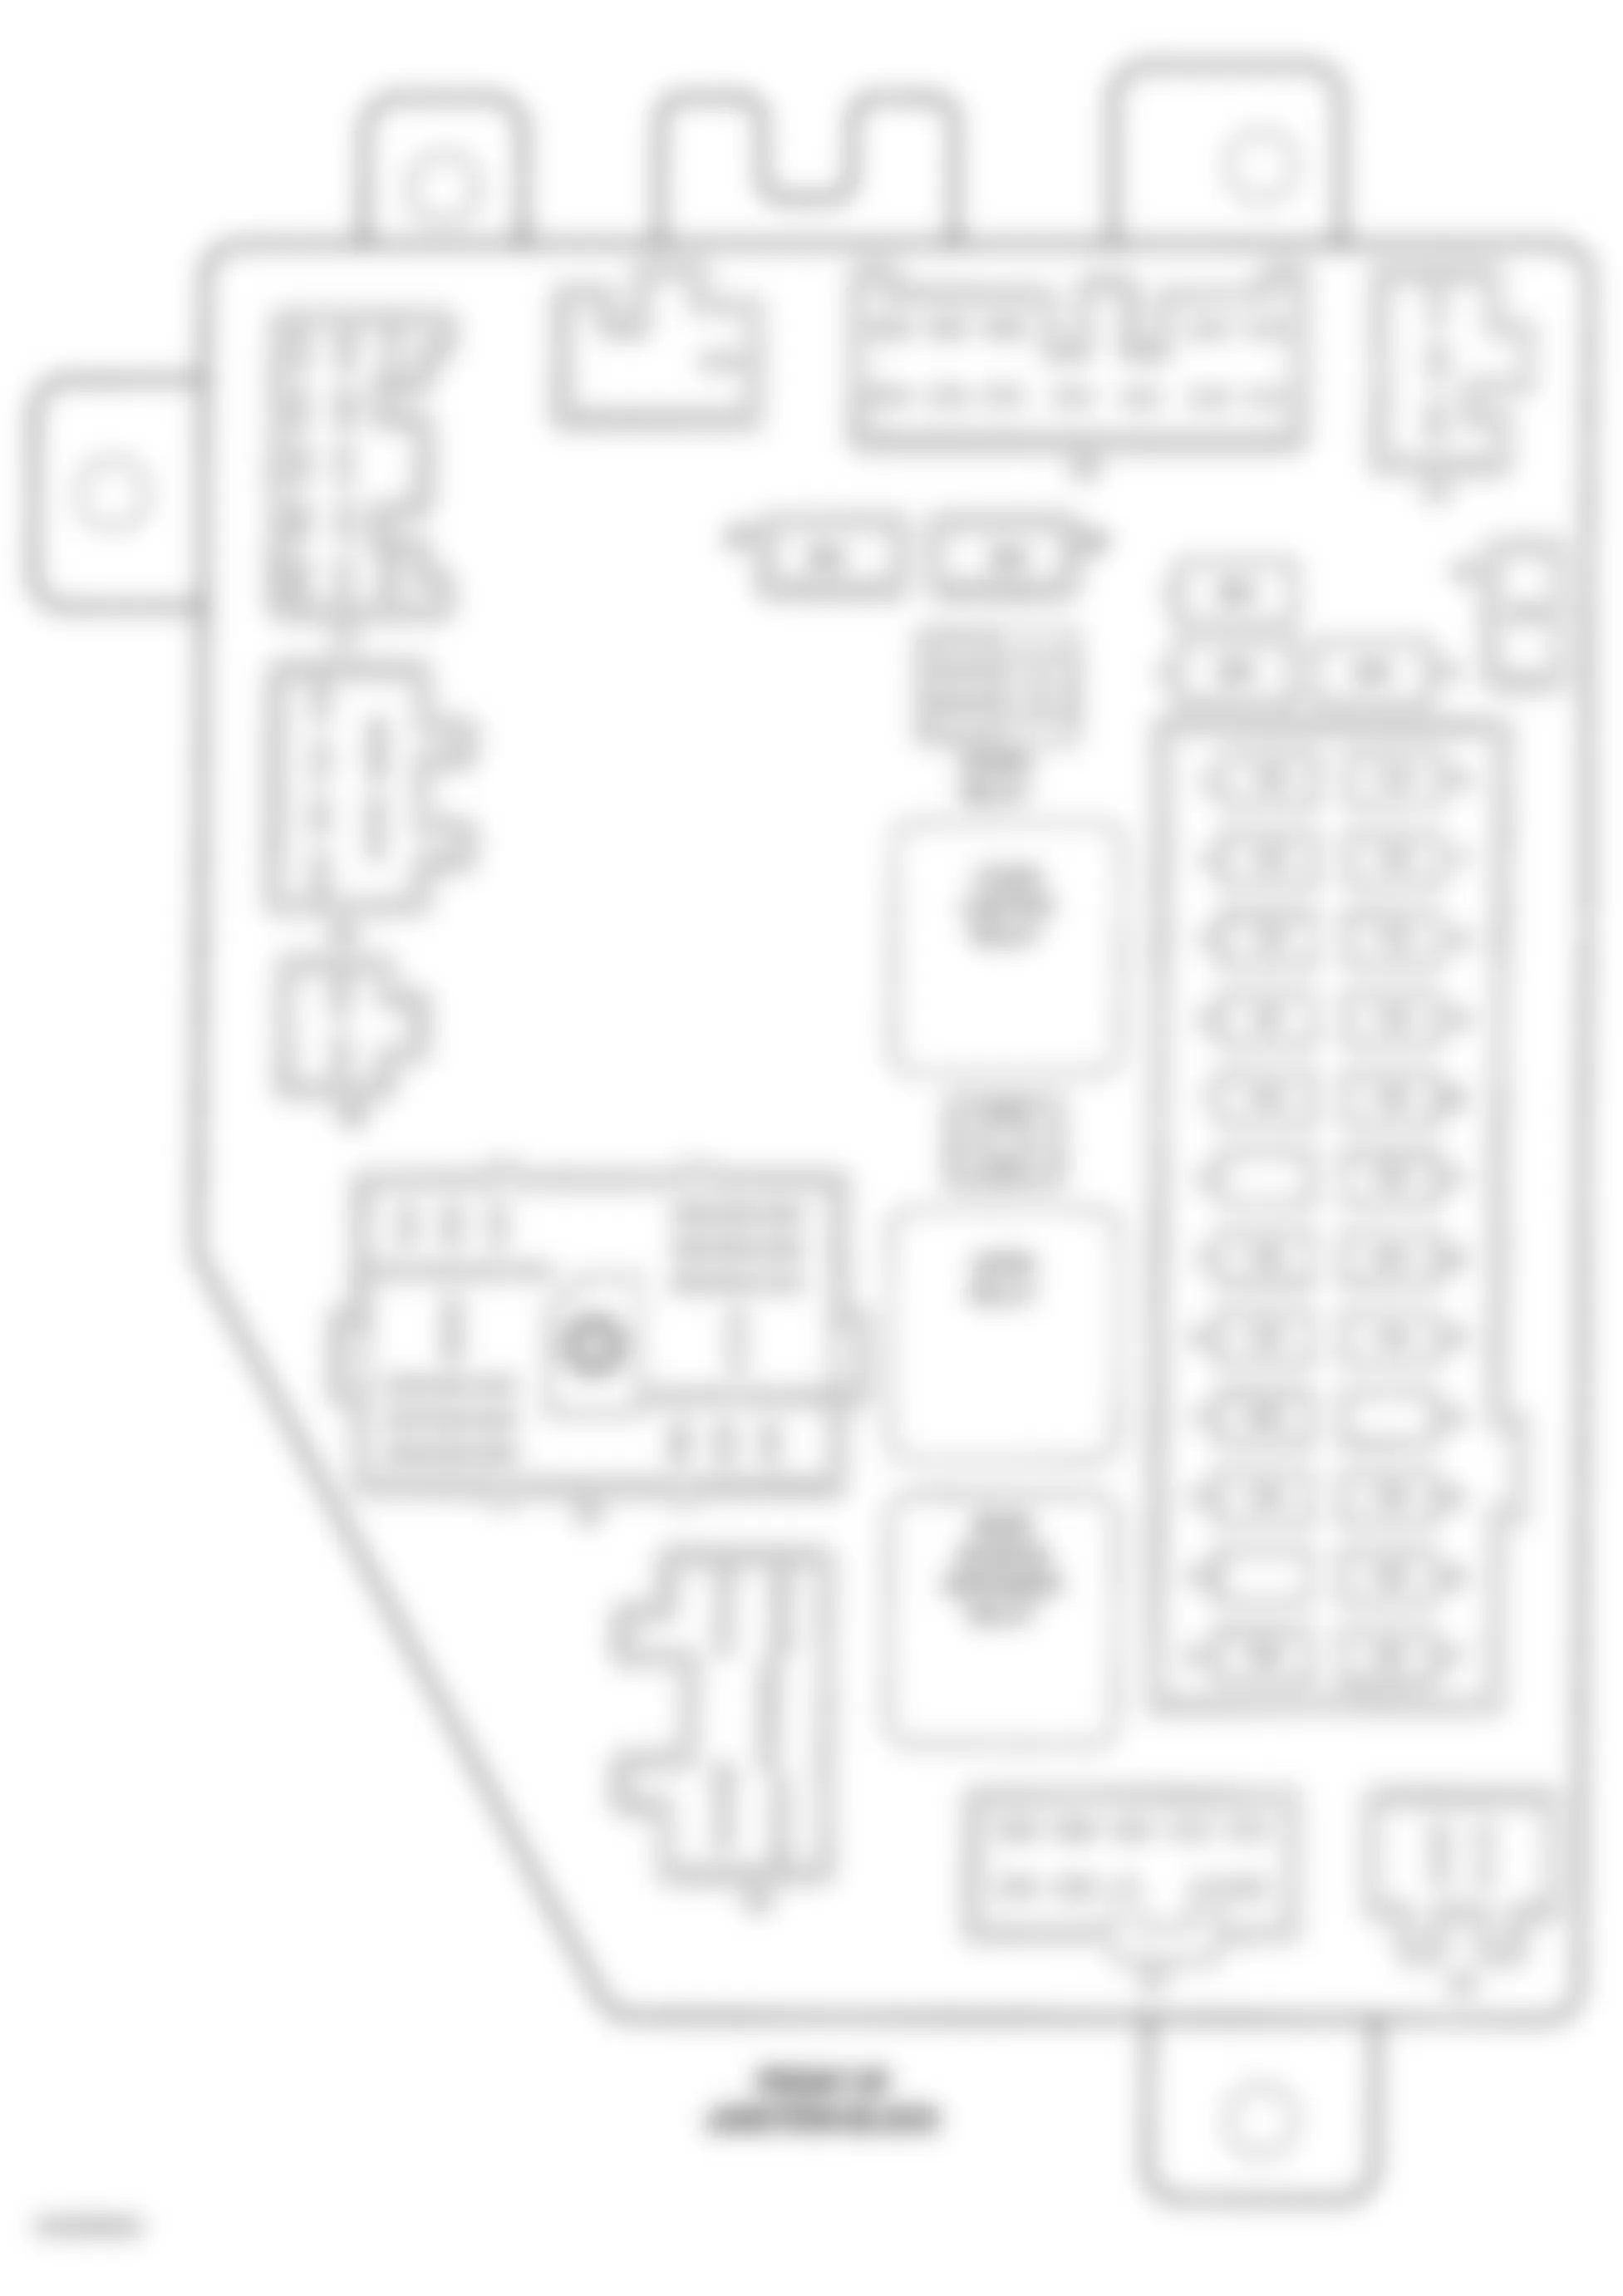 Jeep Cherokee Limited 2000 - Component Locations -  Identifying Junction Block Components